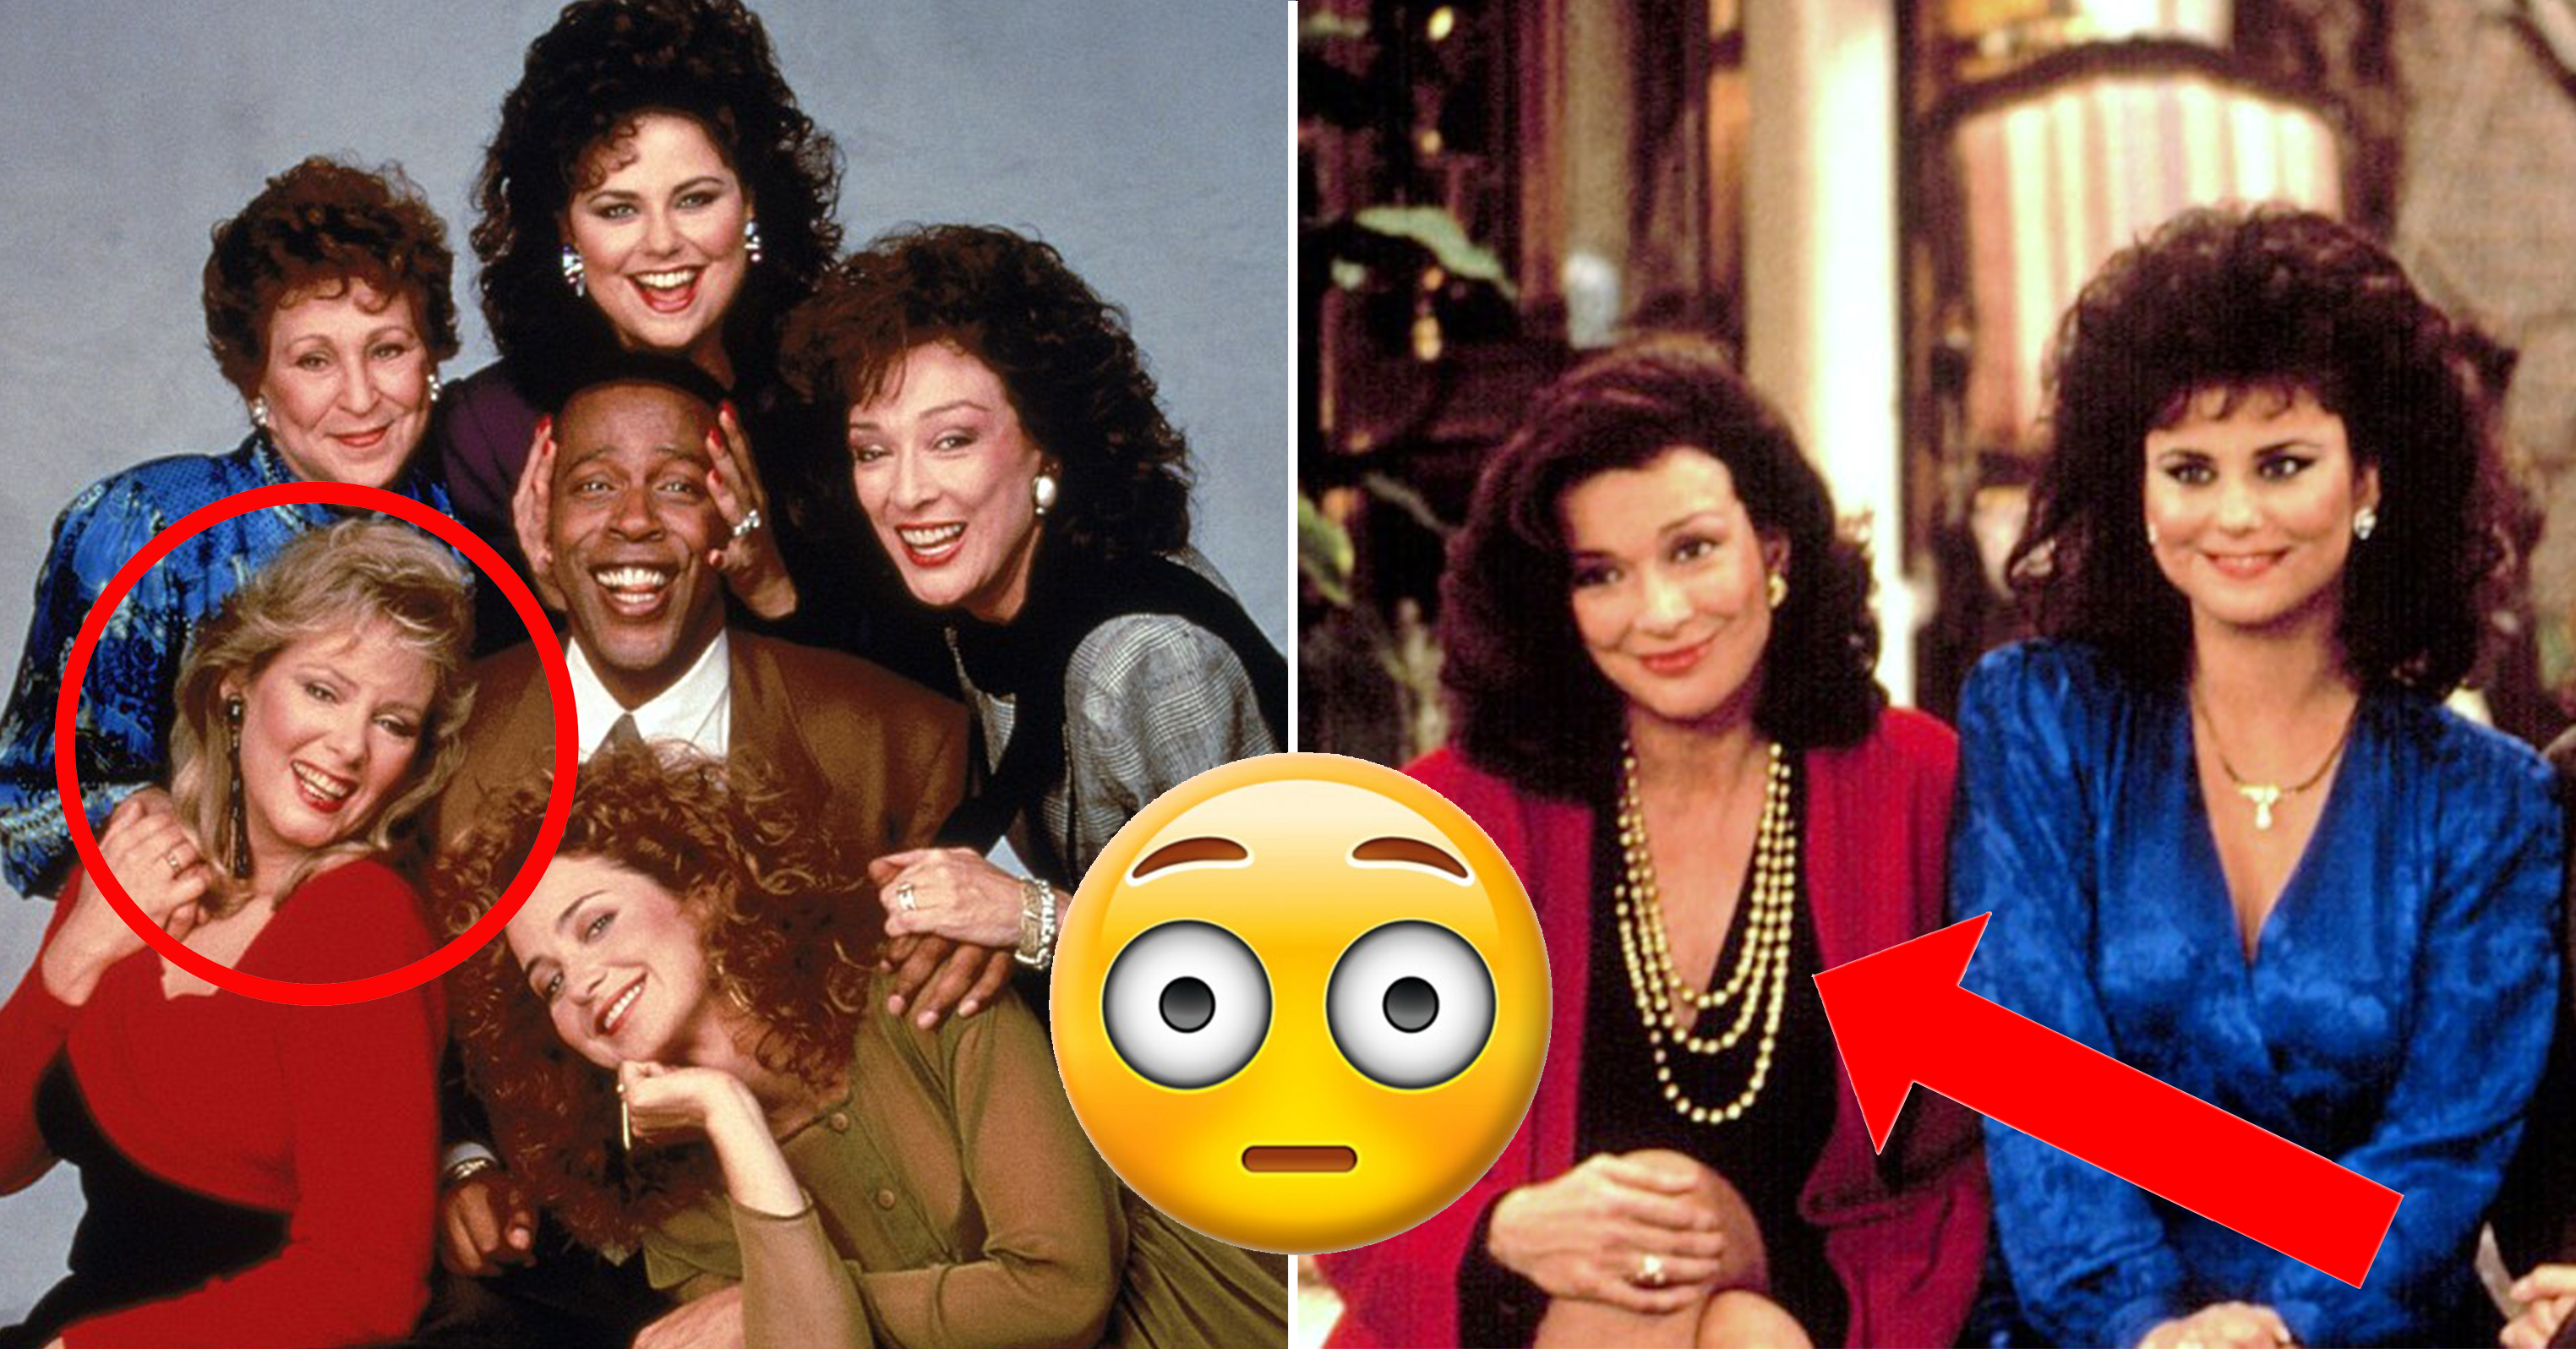 12 Fun Facts You Never Knew About Designing Women!